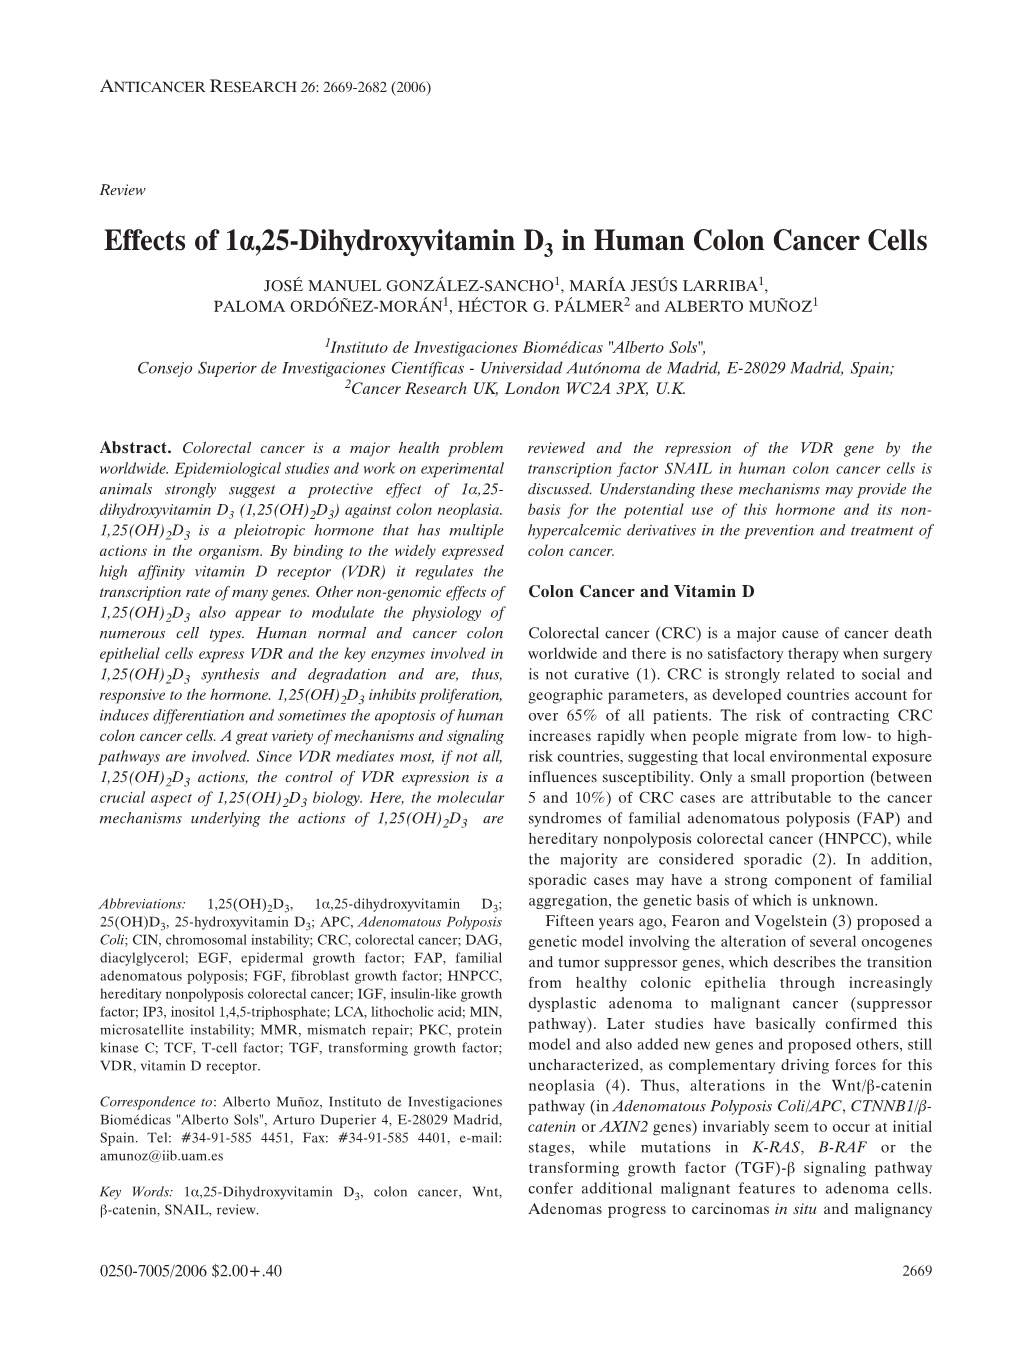 Effects of 1·,25-Dihydroxyvitamin D3 in Human Colon Cancer Cells